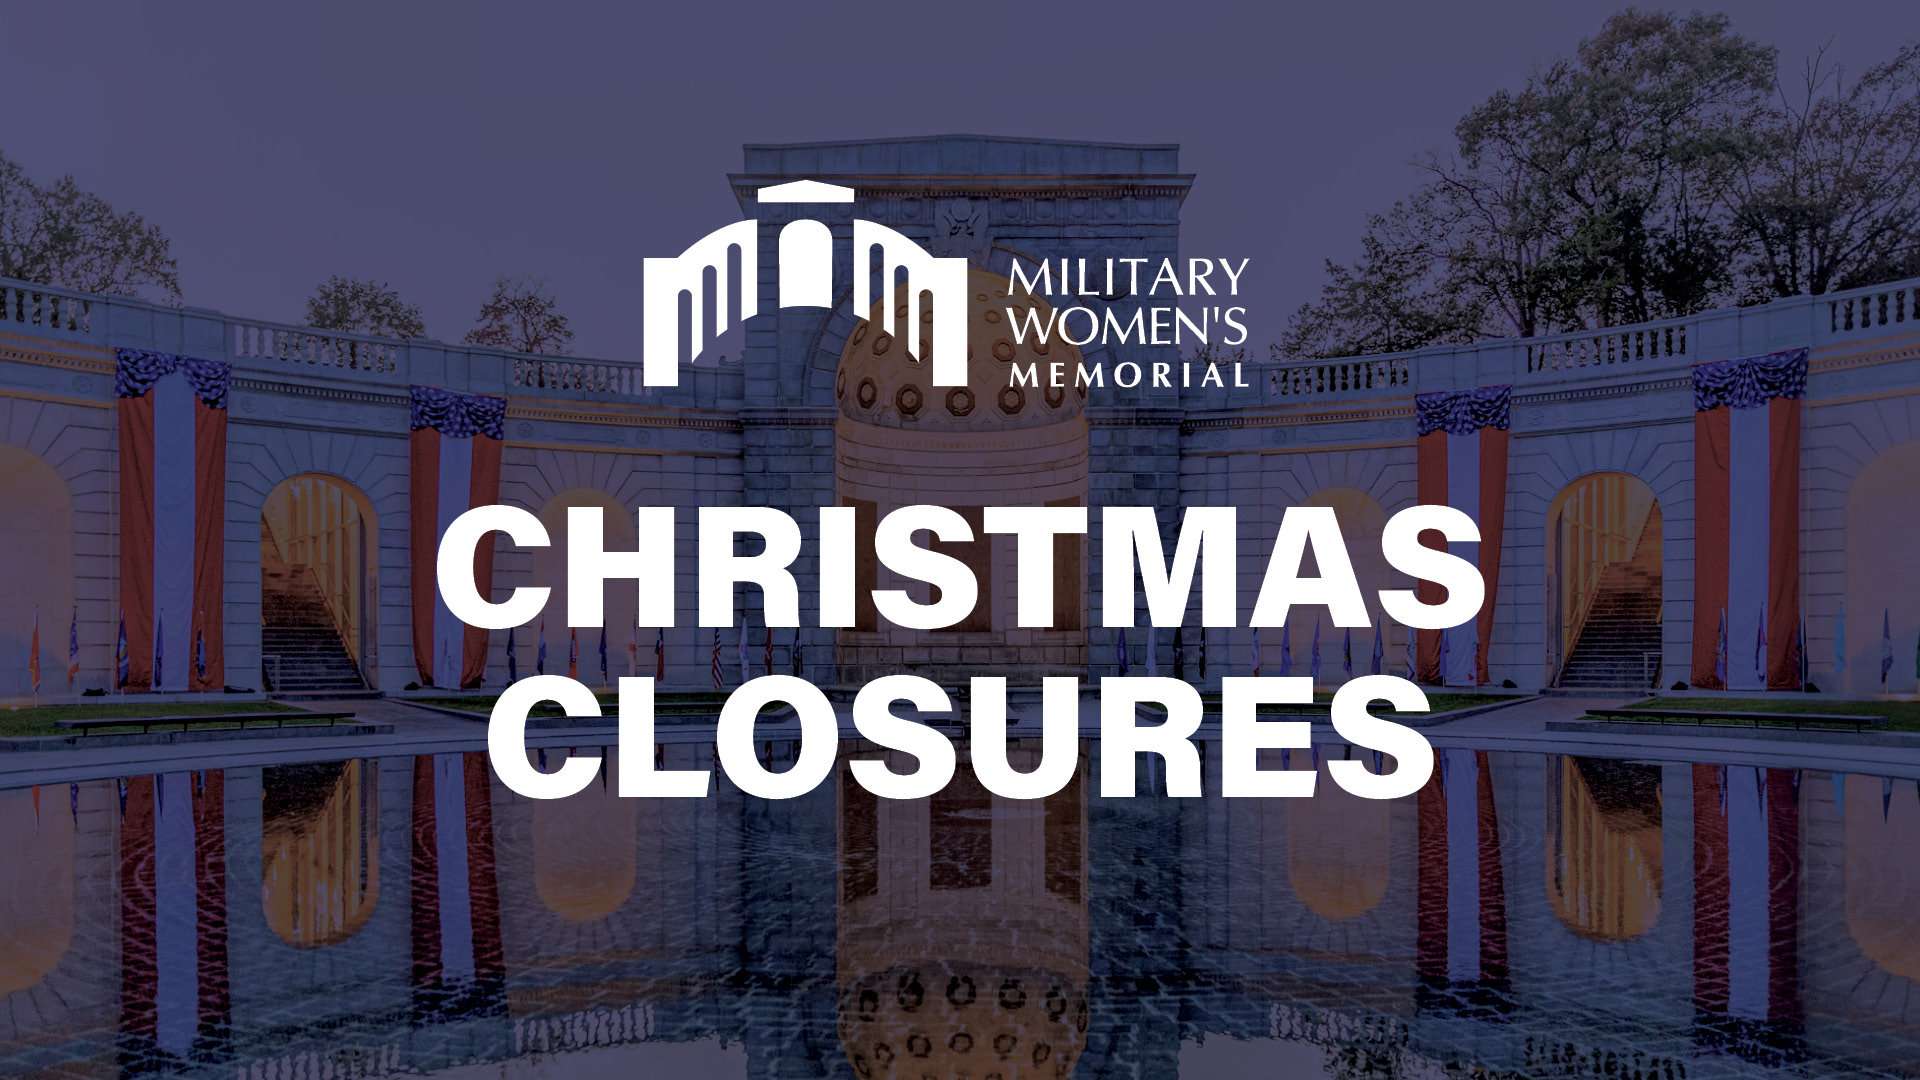 Christmas Closures on blue background